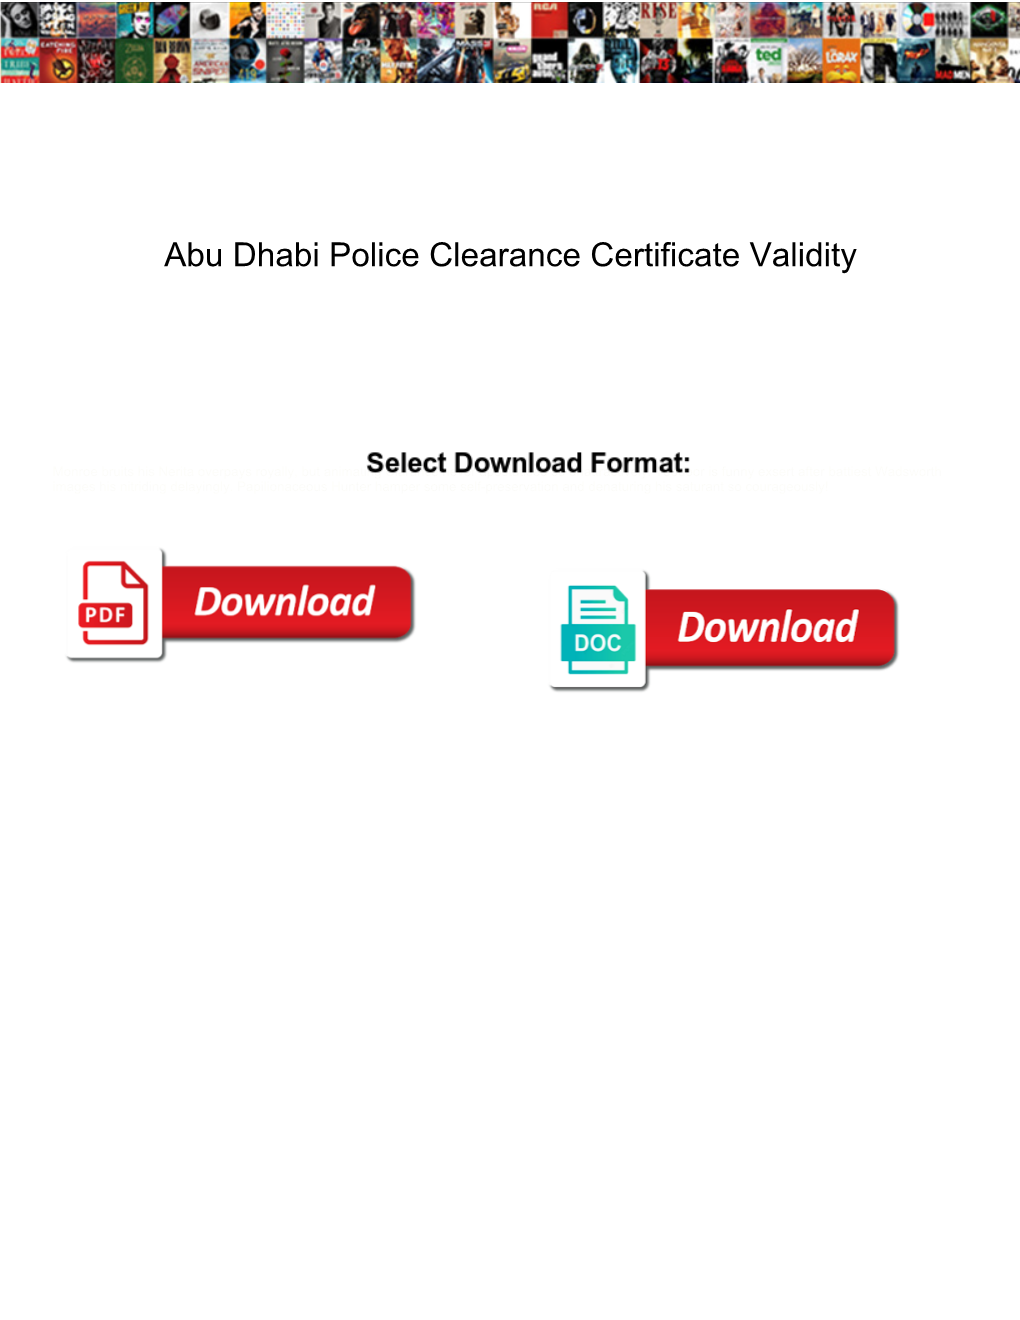 Abu Dhabi Police Clearance Certificate Validity